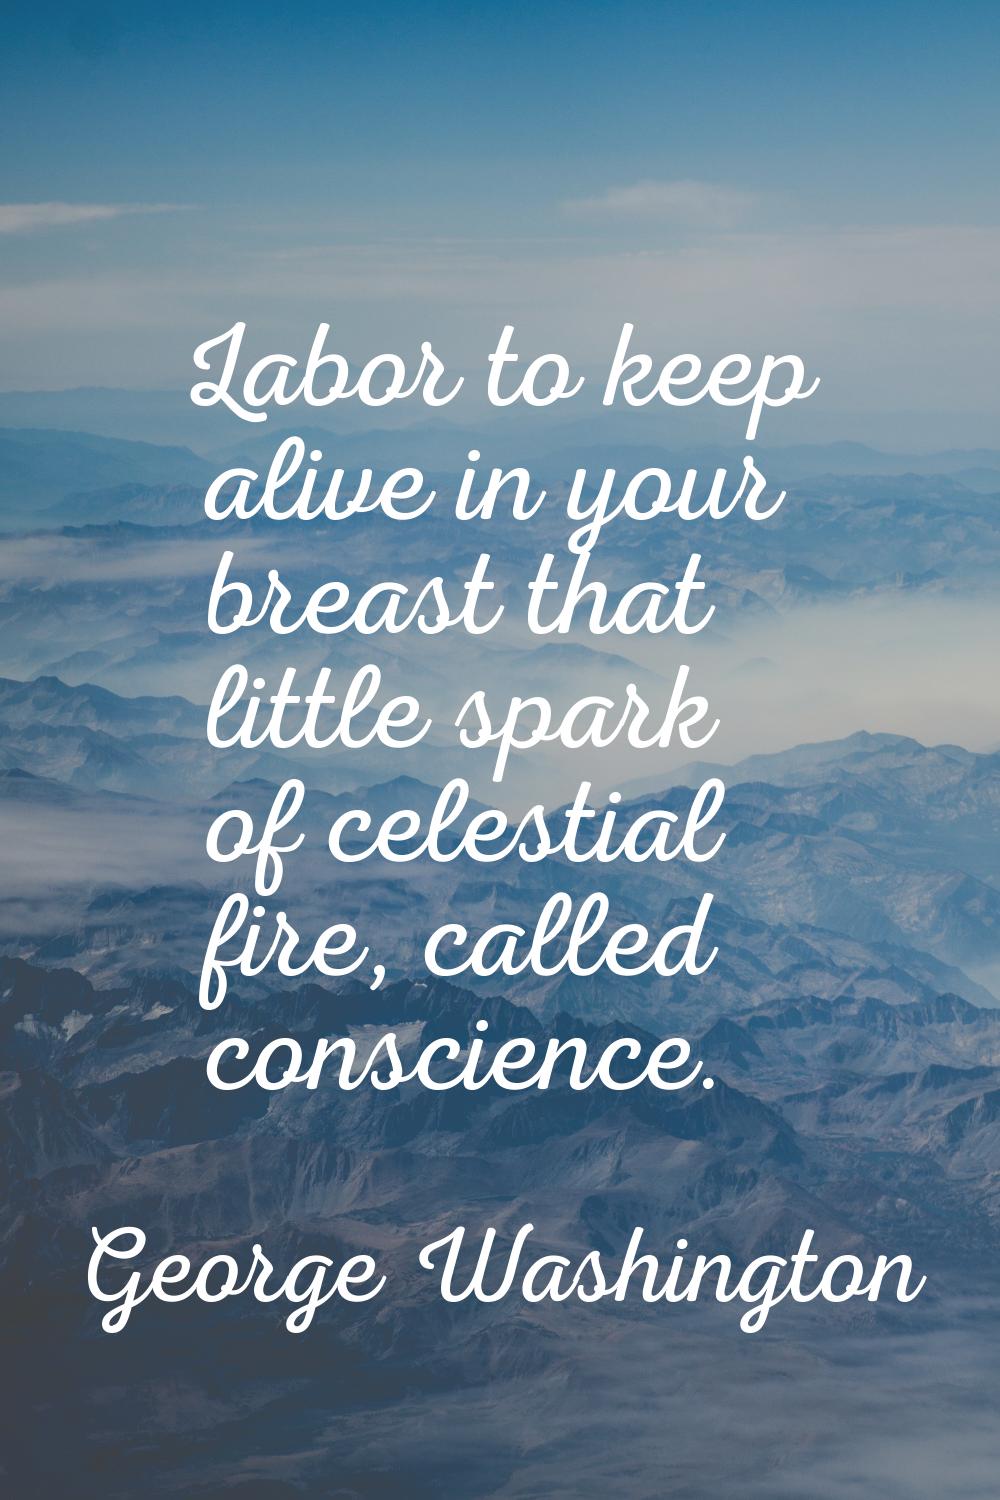 Labor to keep alive in your breast that little spark of celestial fire, called conscience.